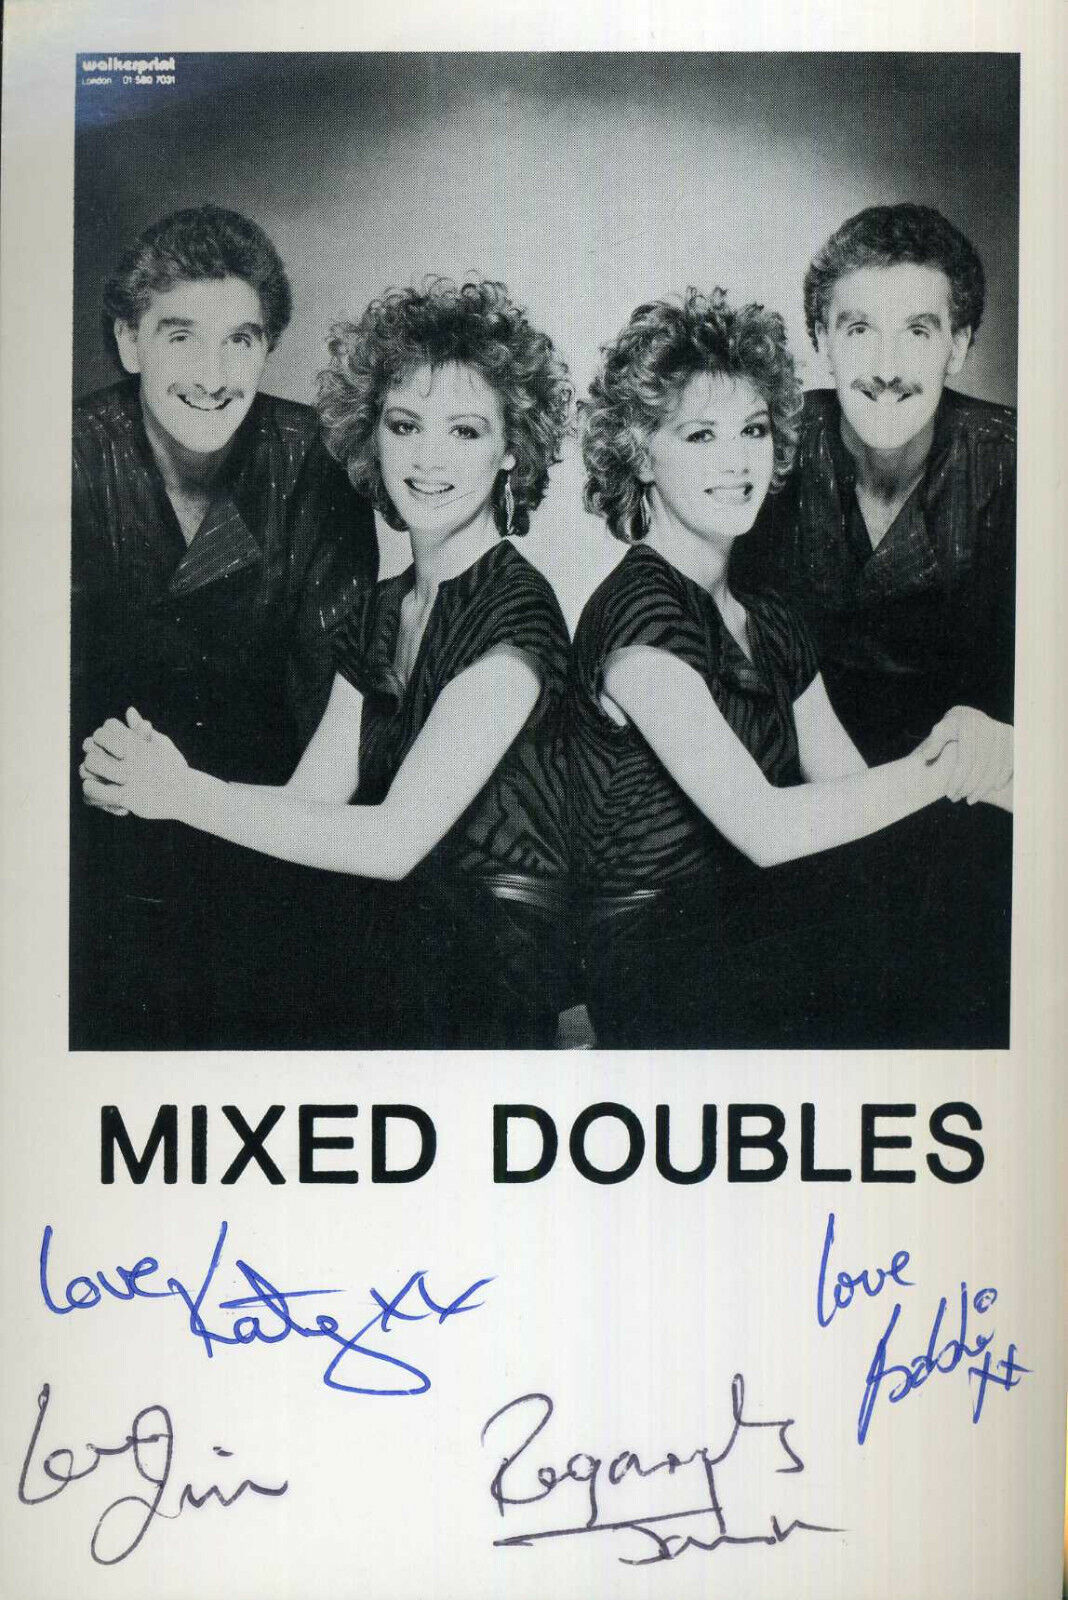 MIXED DOUBLES Signed Photo Poster paintinggraph - Pop / Vocalist Group - TWINS - preprint